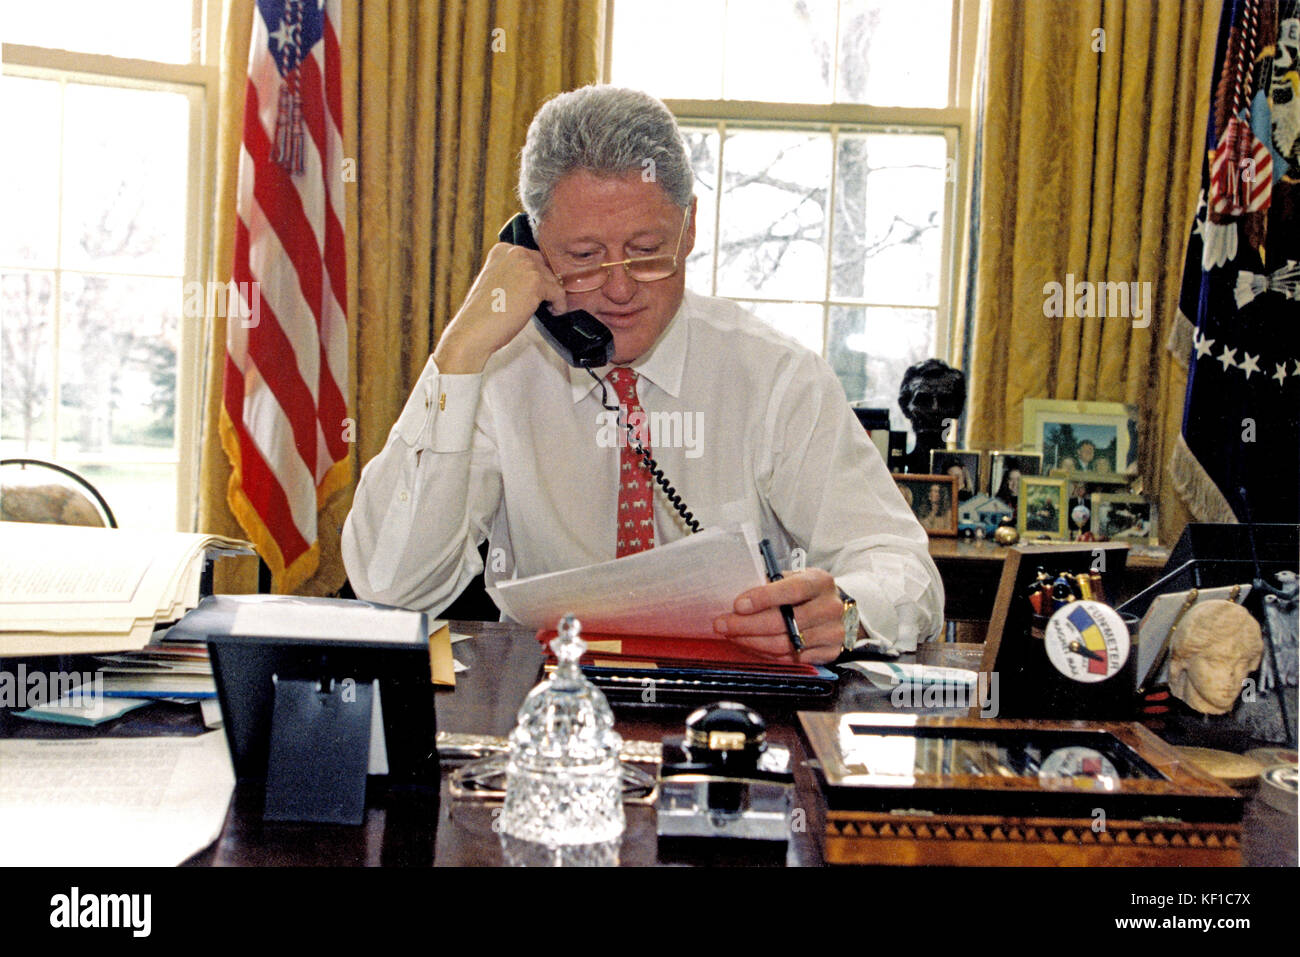 United States President Bill Clinton speaks on the telephone to President Boris Yeltsin of Russia from the Oval Office of the White House in Washington, DC on February 27, 1997. Mandatory Credit: Ralph Alswang/White House via CNP - NO WIRE SERVICE - Photo: Ralph Alswang/Consolidated News Photos/Ralph Alswang - White House via CNP Stock Photo